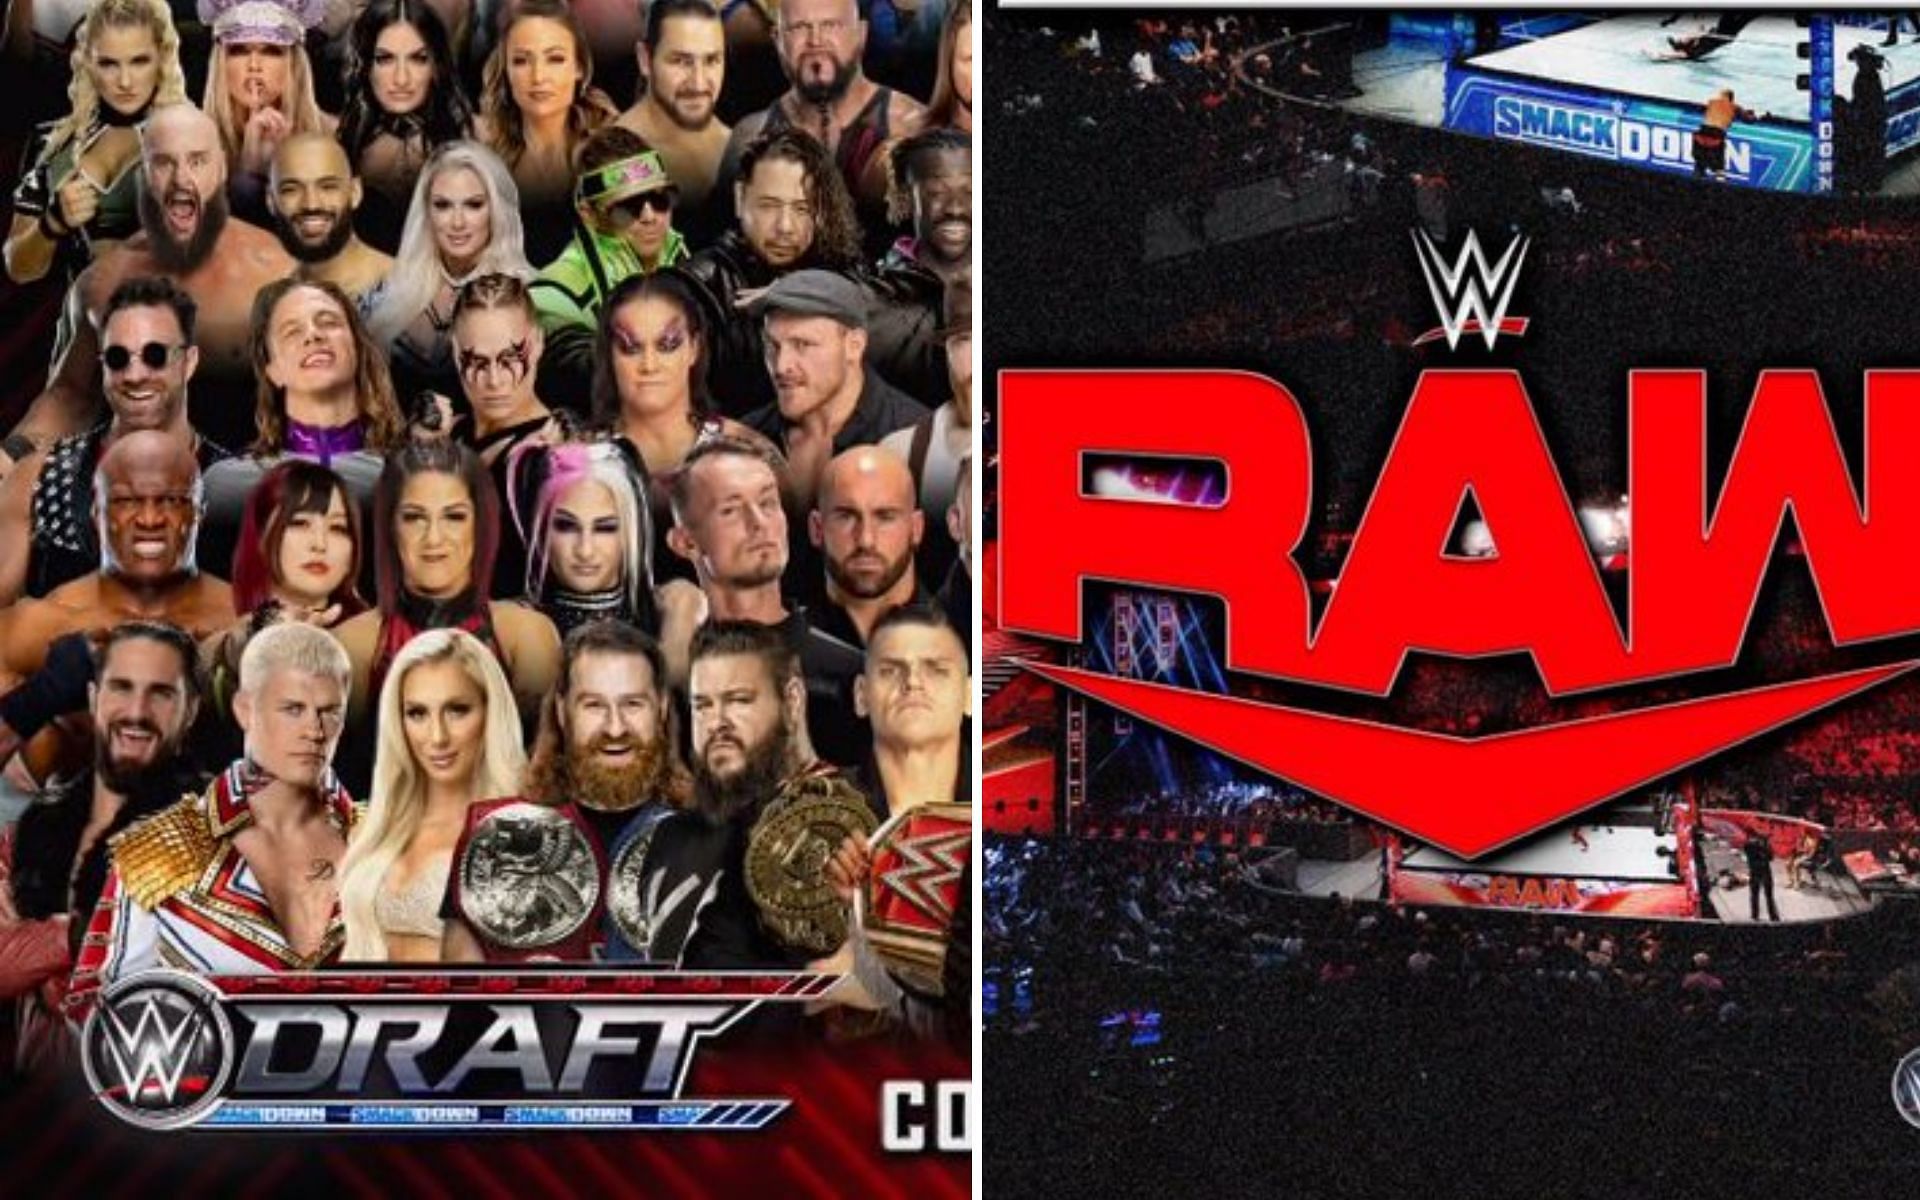 The WWE Draft will result in some major changes to both RAW and SmackDown